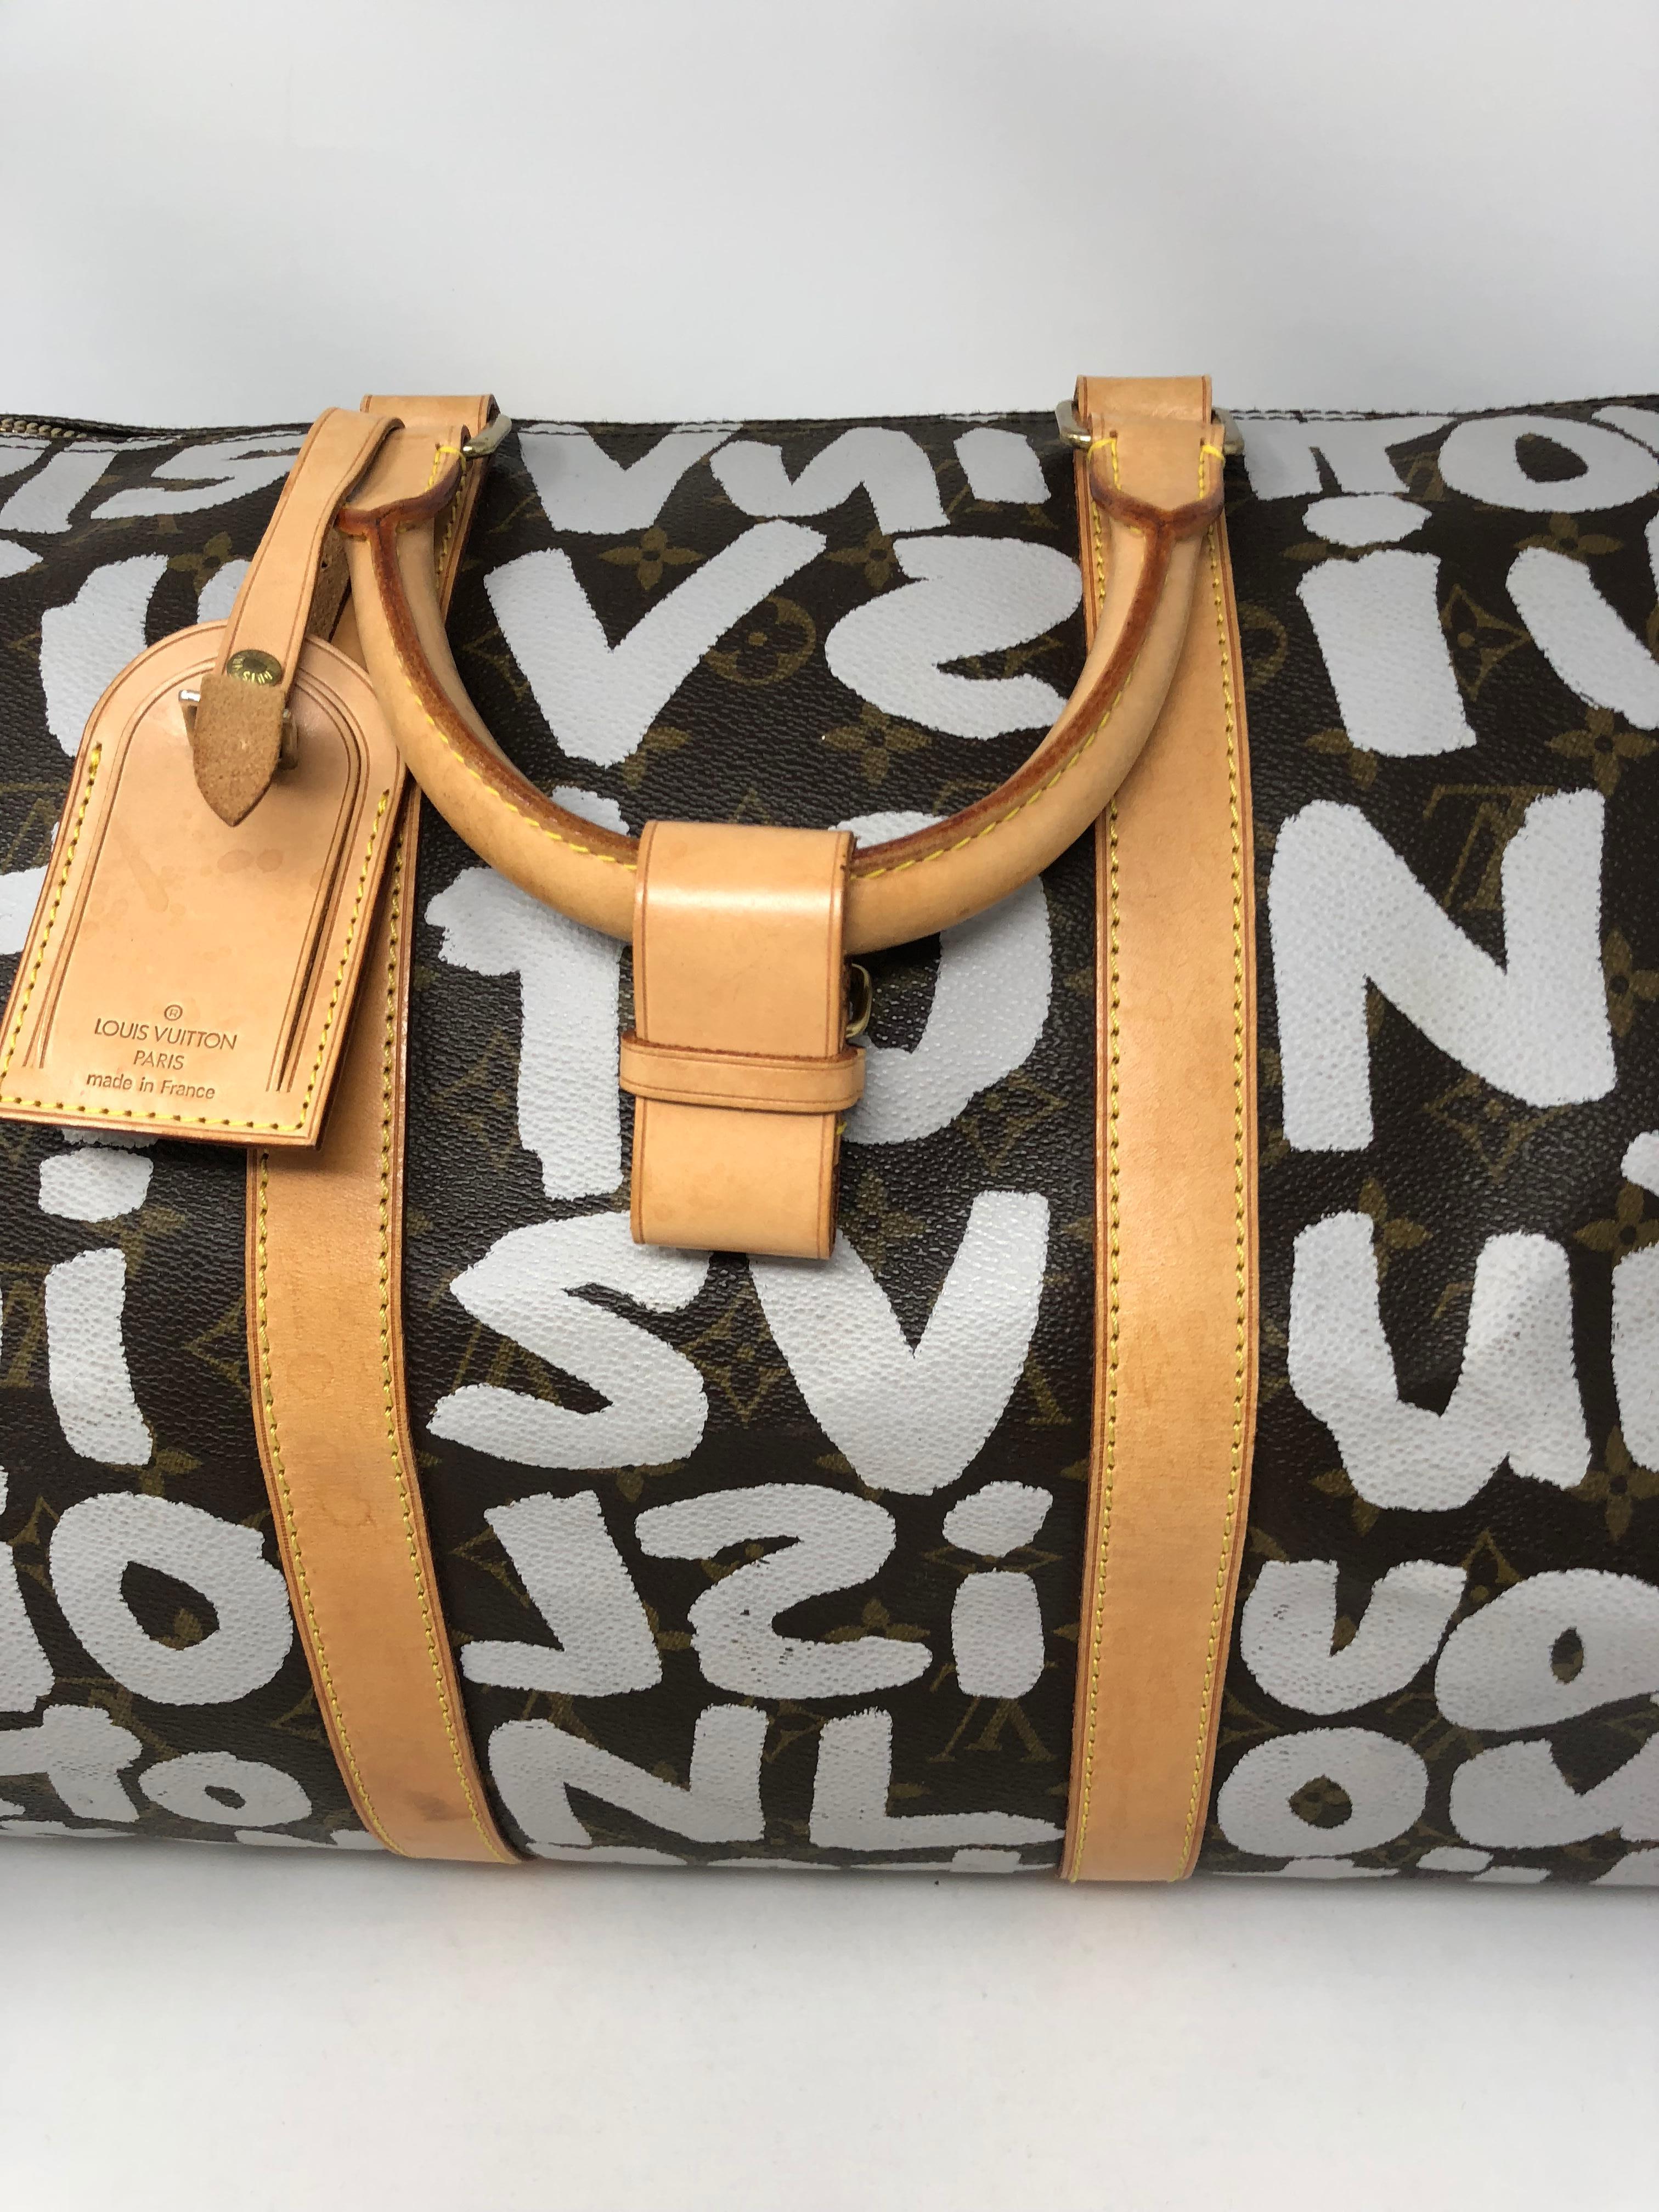 Louis Vuitton Graffiti Keepall 50 designed by artist Stephen Sprouse. Monogram canvas with white lettering throughout. Iconic design by famous artist the Graffiti keepall is a must for LV collectors. Has some normal vintage wear but has lots of life